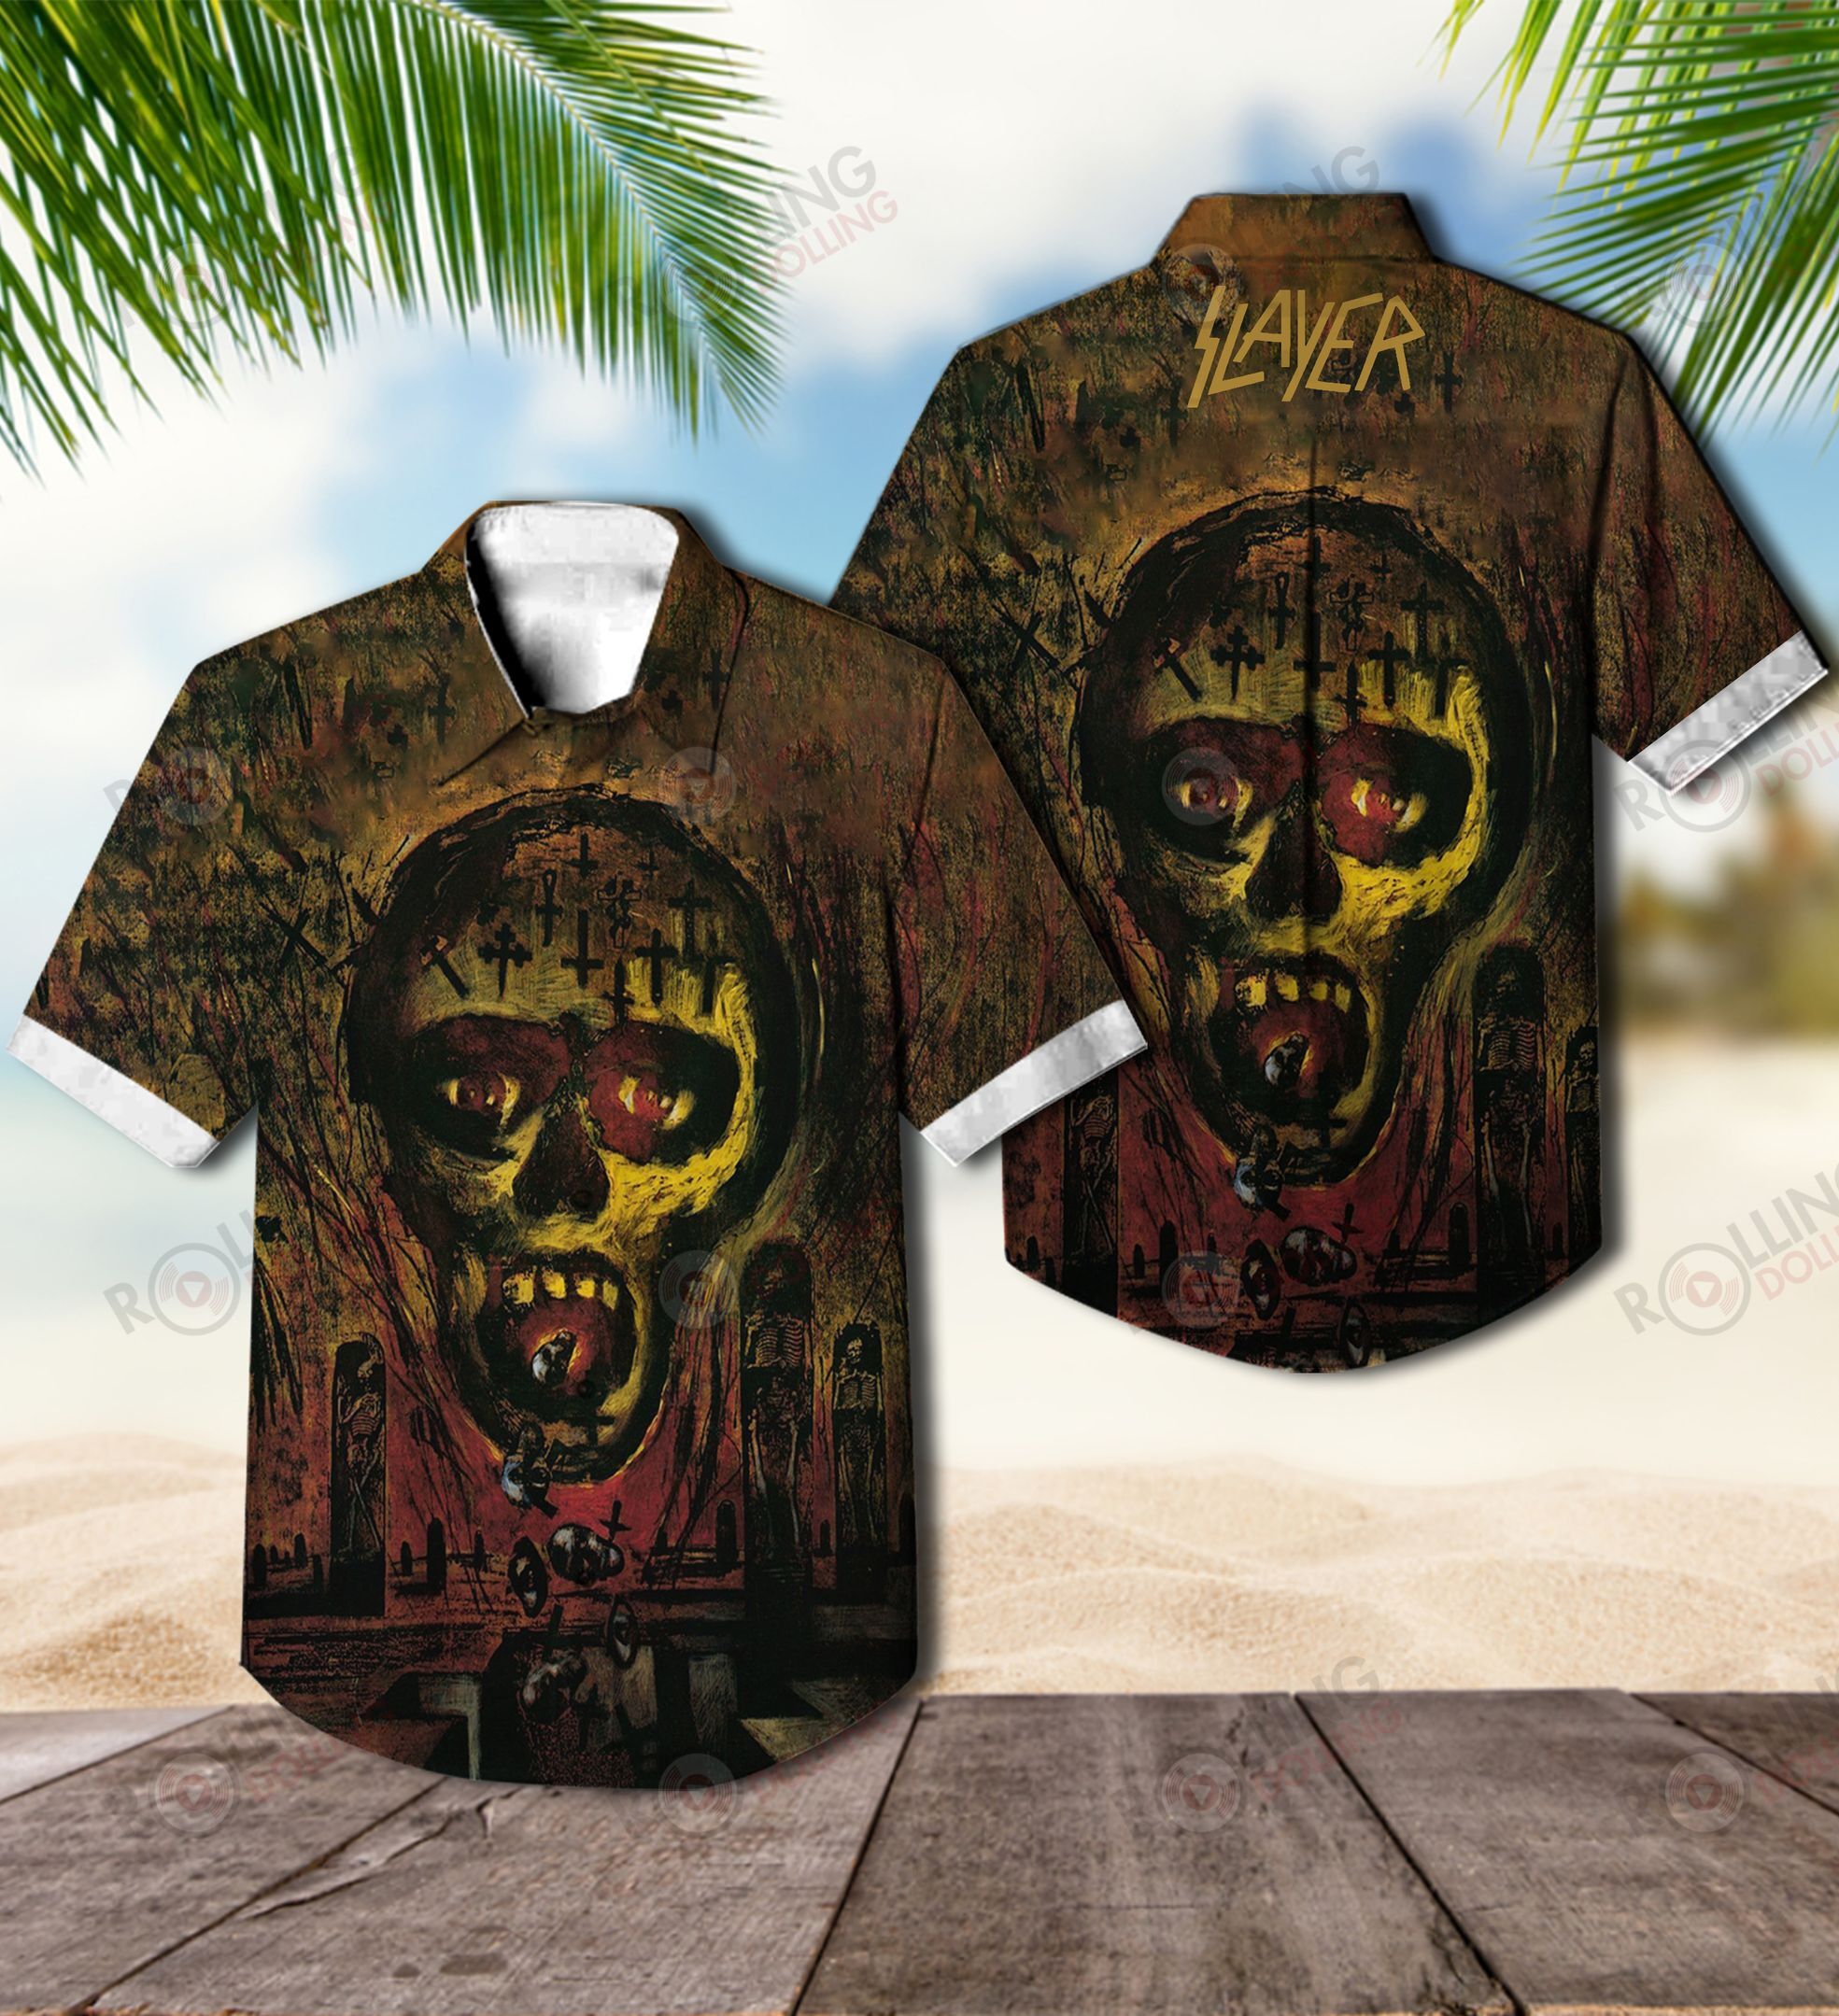 This would make a great gift for any fan who loves Hawaiian Shirt as well as Rock band 14